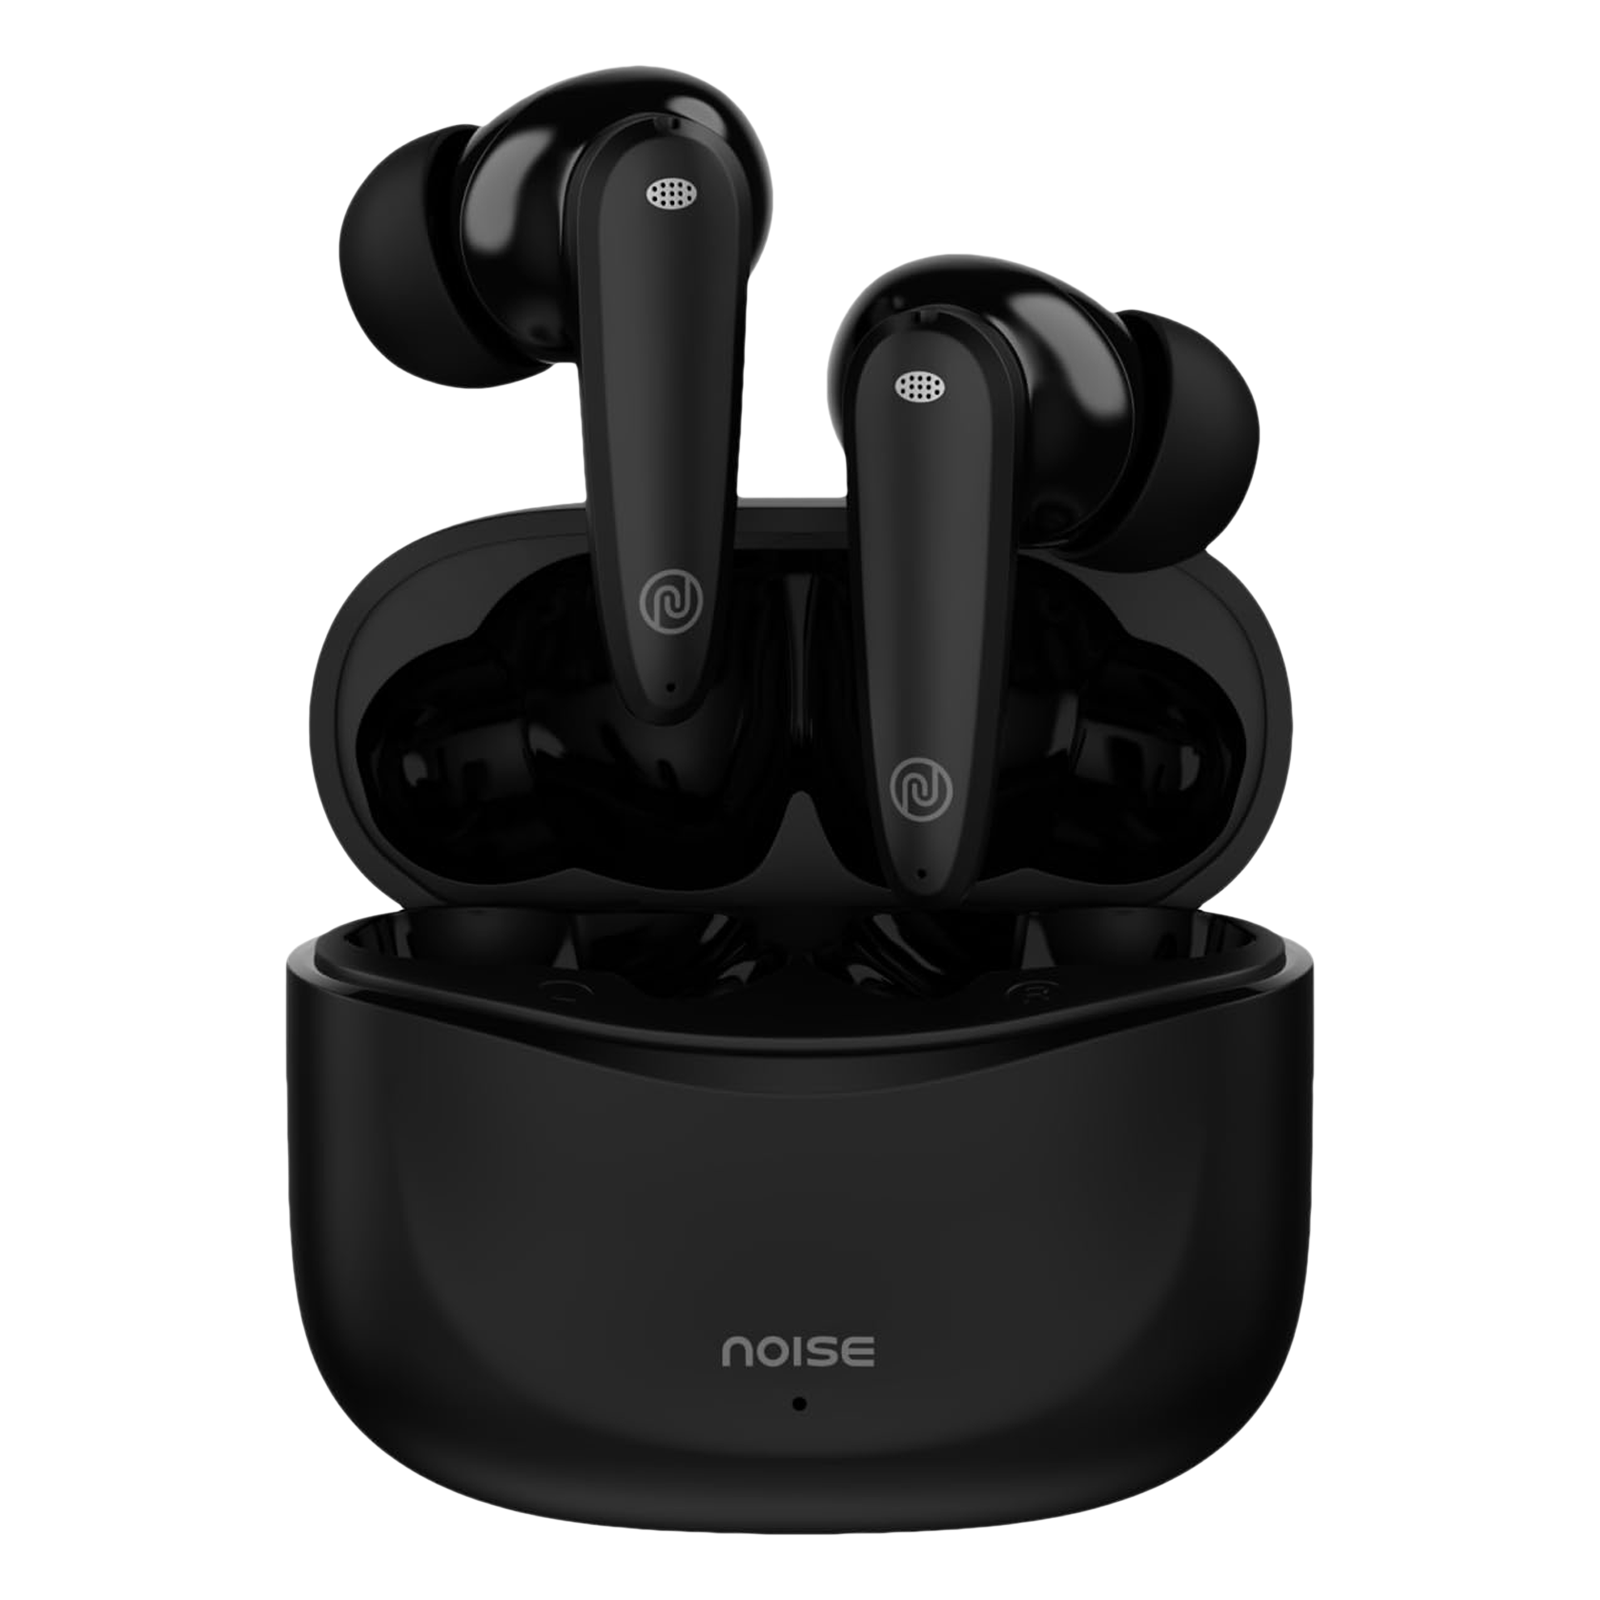 noise Buds VS106 TWS Earbuds with Environmental Noise Cancellation (IPX5 Water Resistant, Instacharge, Jet Black)